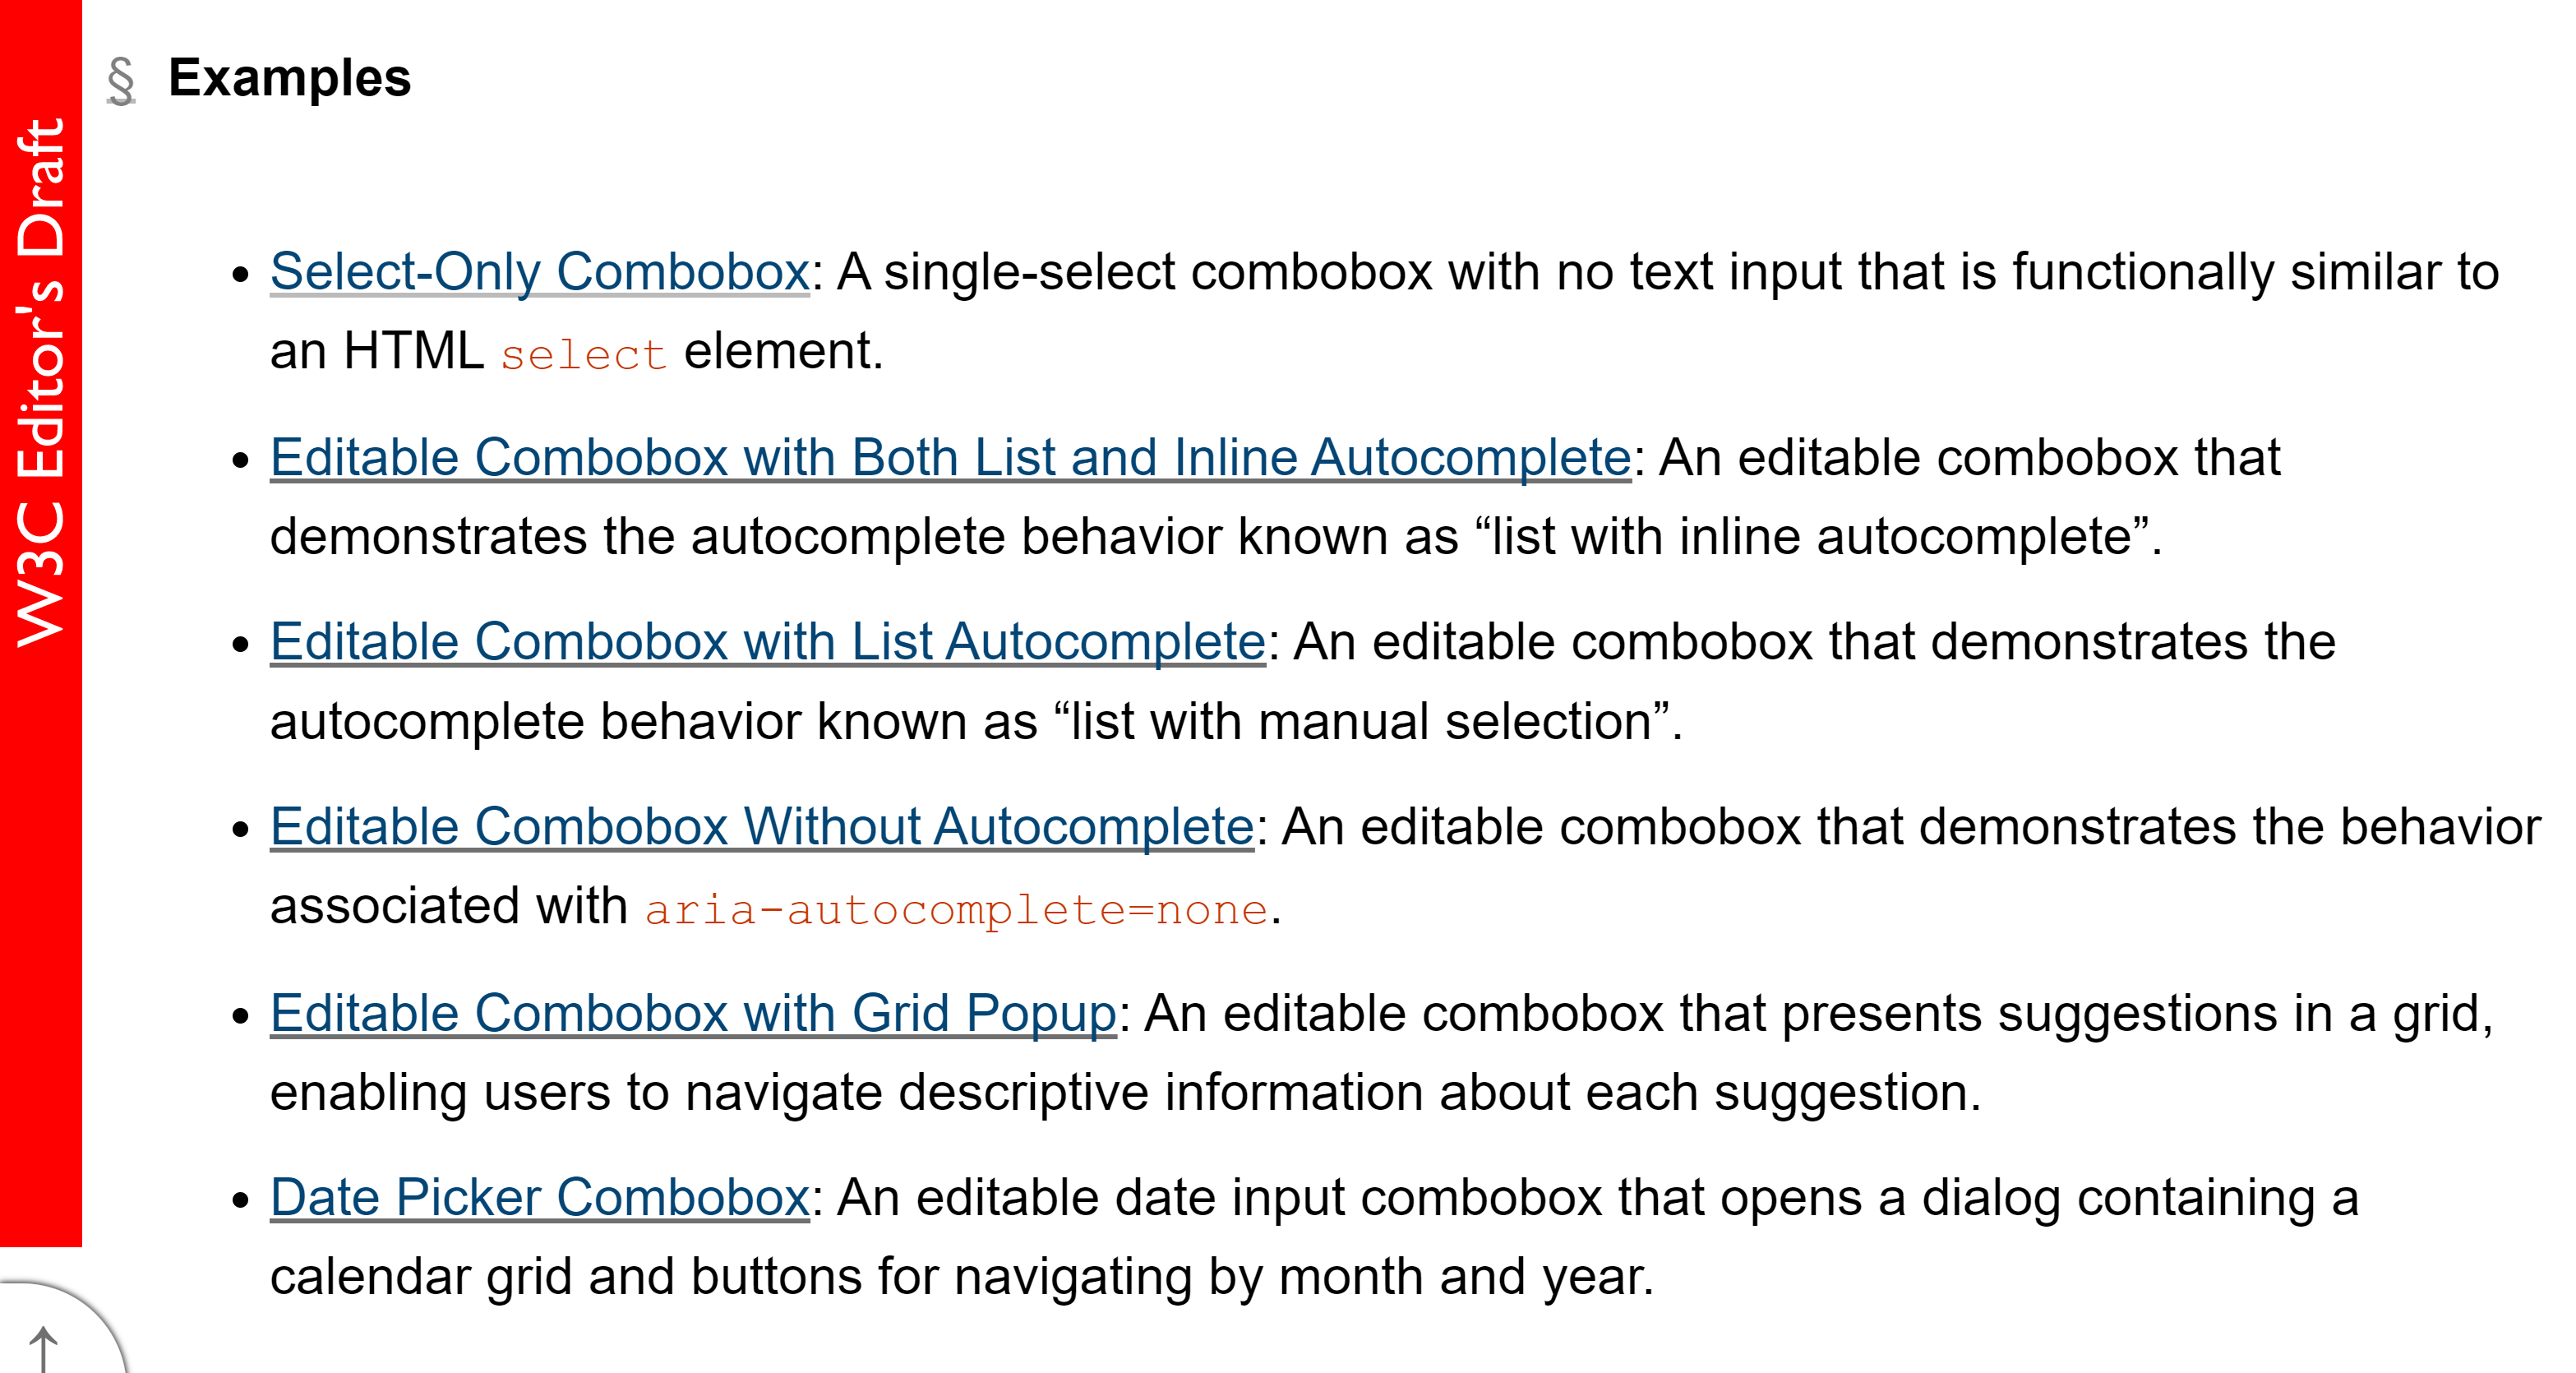 screenshot of the ARIA practices list of 6 different combobox examples, from a select-only combobox to editable comboboxes, to a datepicker combo